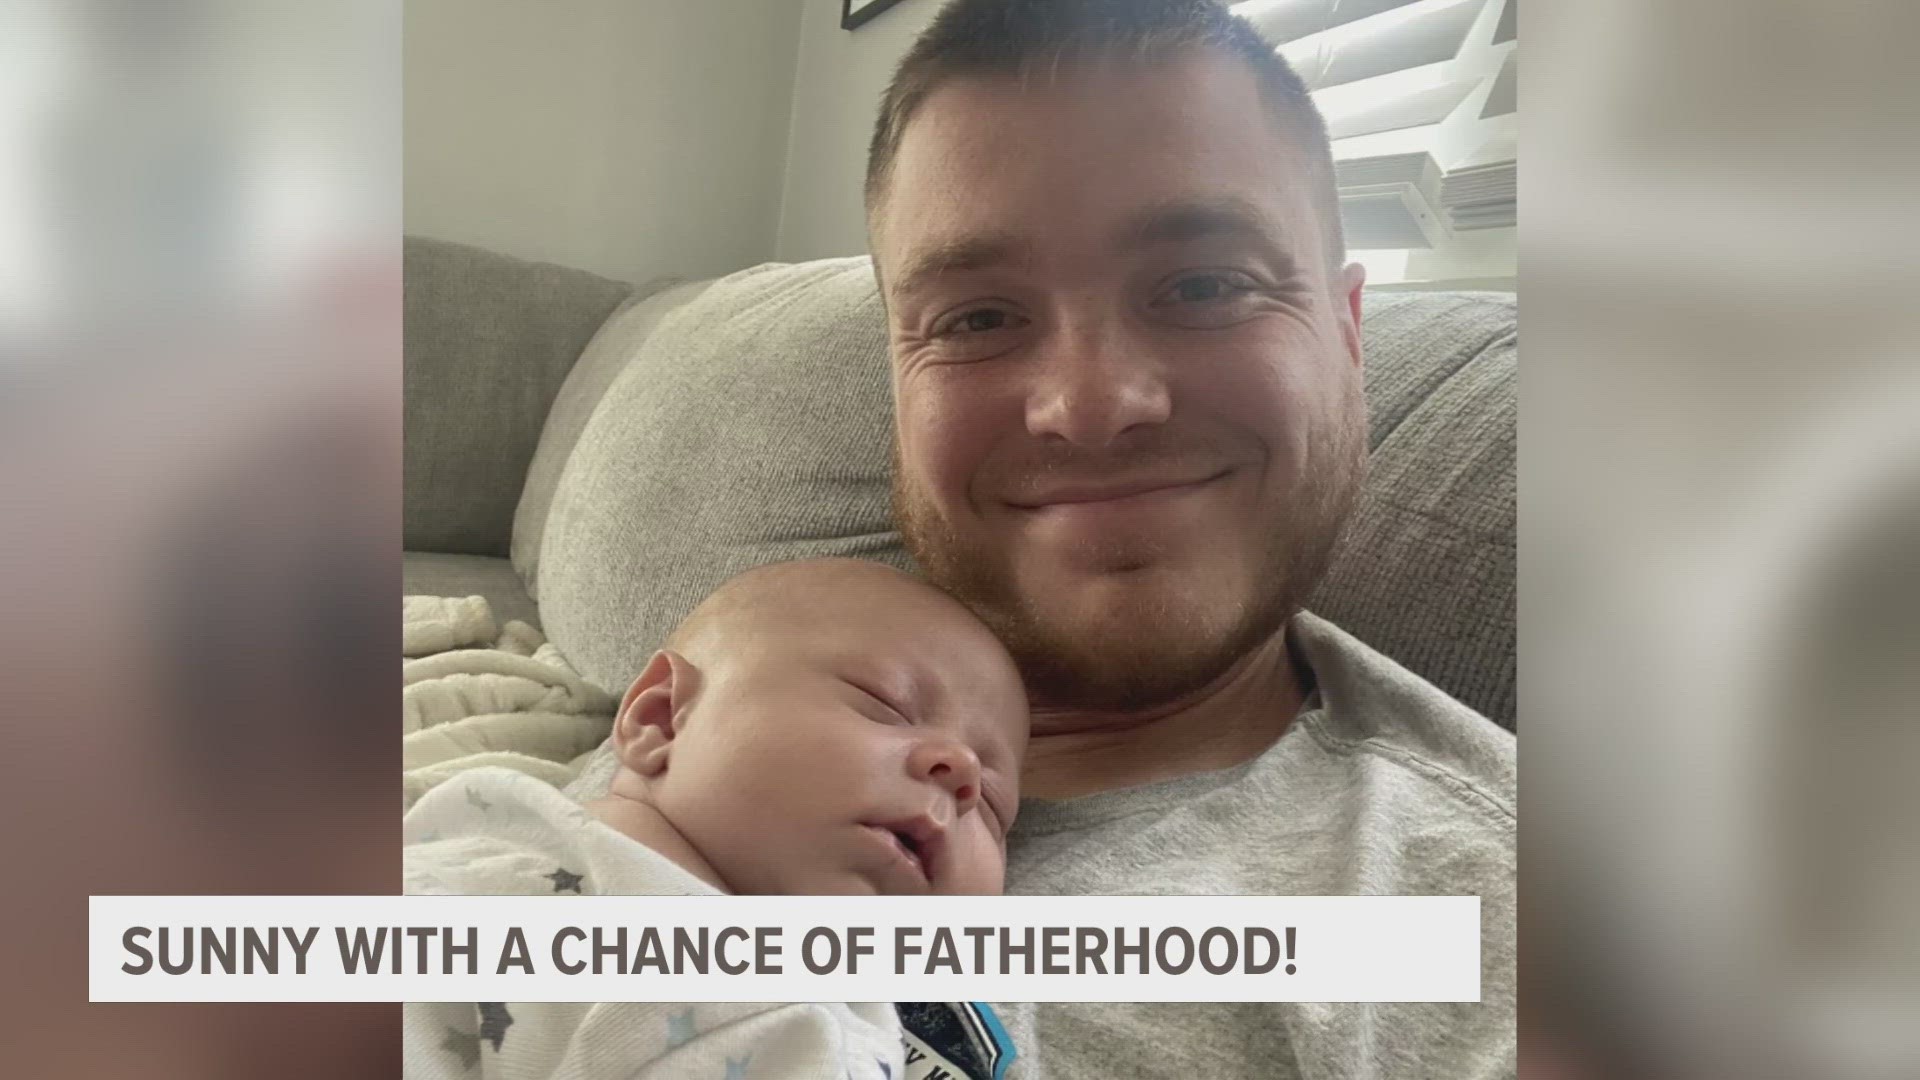 Blake is sharing some of his favorite things about fatherhood since he and his wife Lauren welcomed their son Cameron back in July.